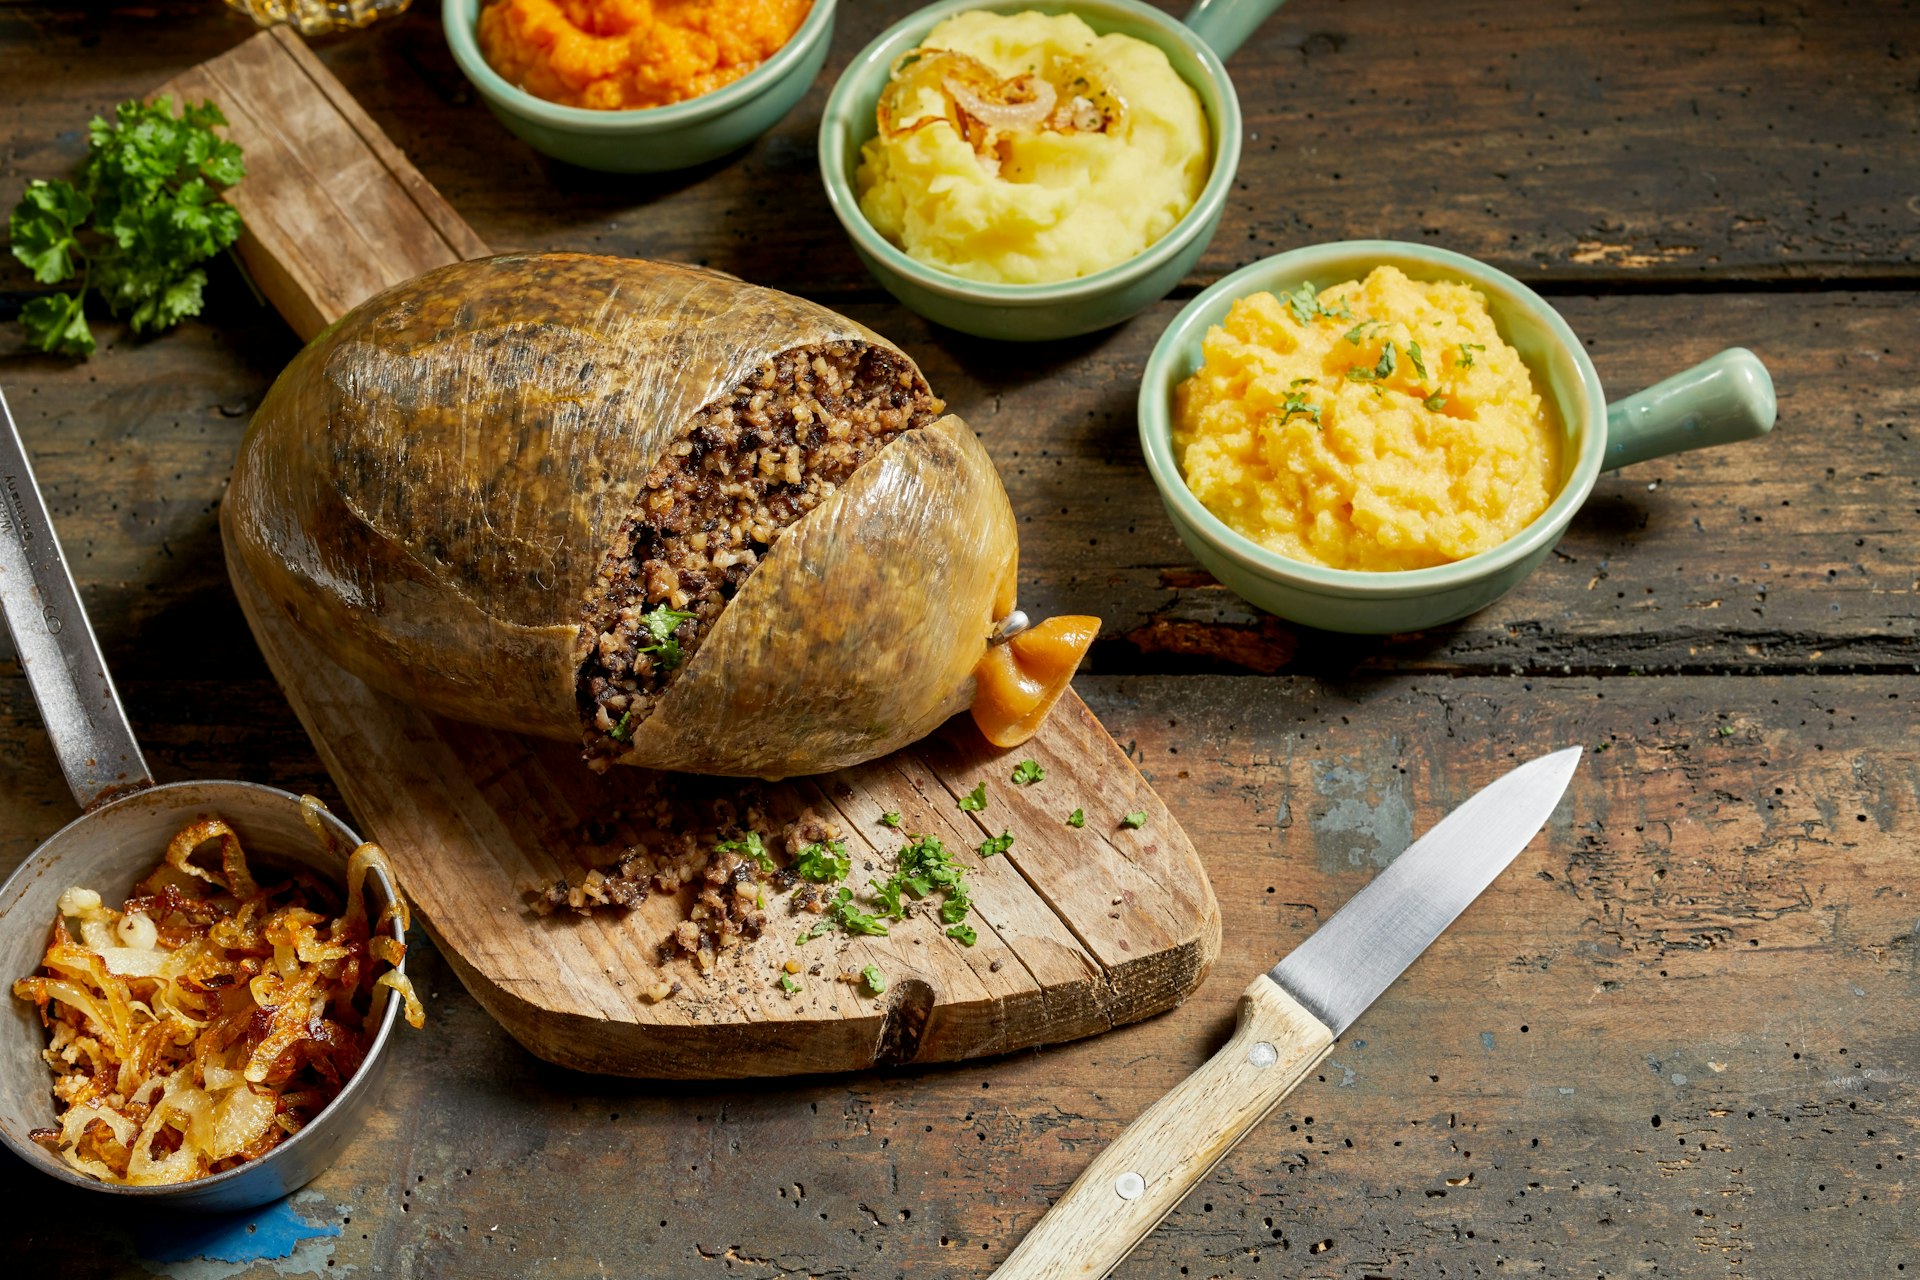 Traditional haggis meal for Robert Burns Supper, a Scottish tradition with cooked sliced haggis, neeps, tatties, onion and carrot